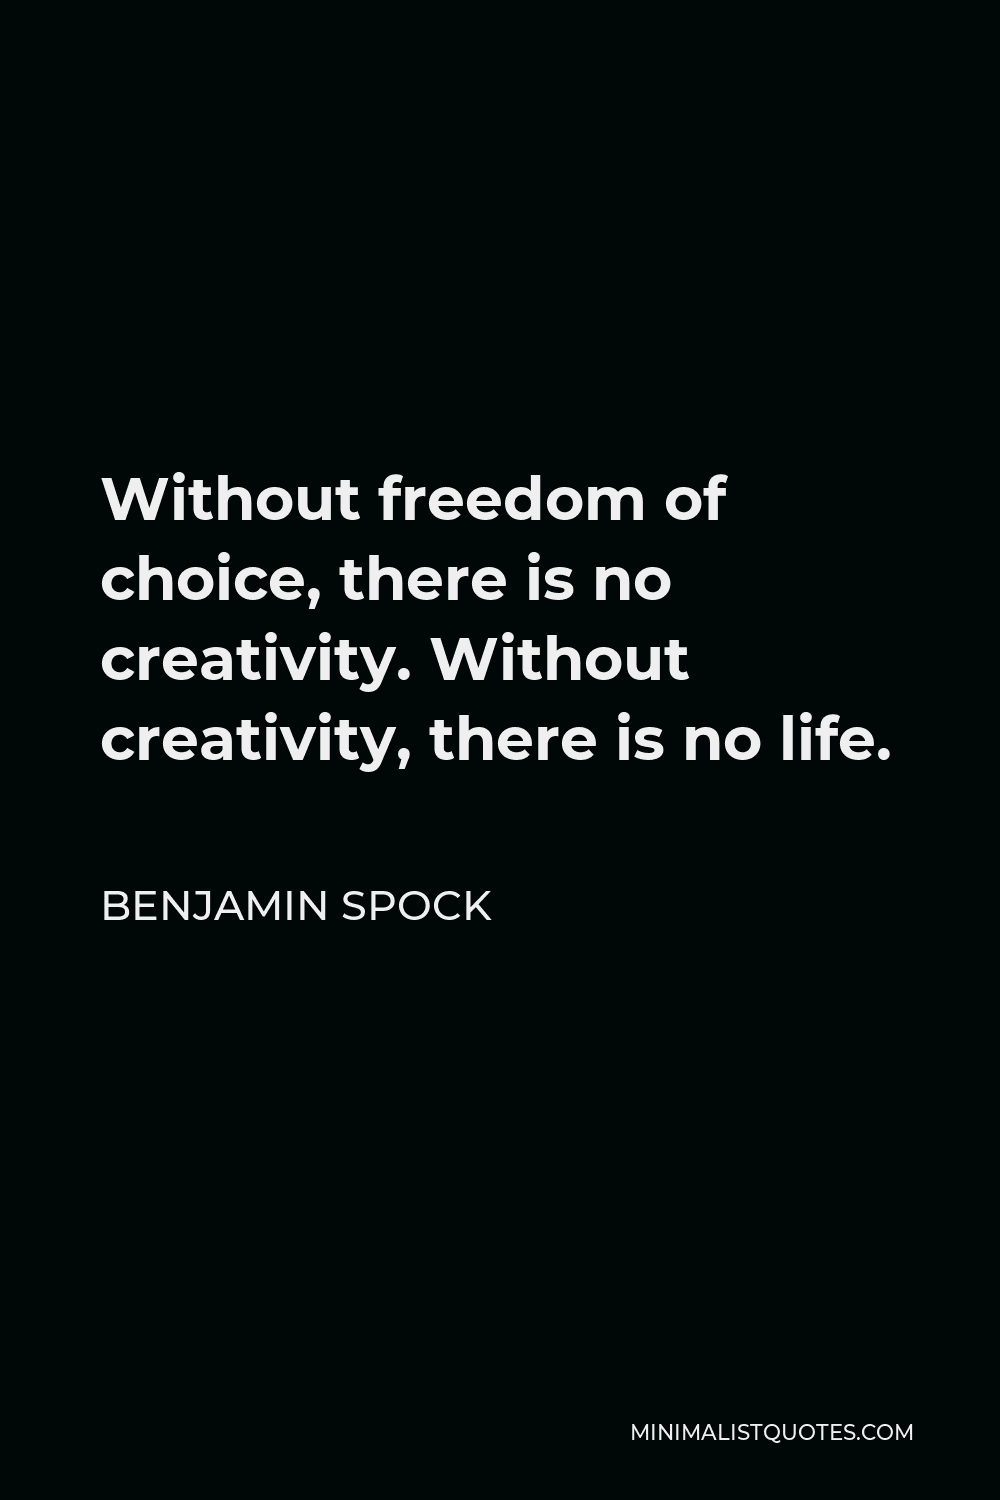 Benjamin Spock Quote - Without freedom of choice, there is no creativity. Without creativity, there is no life.